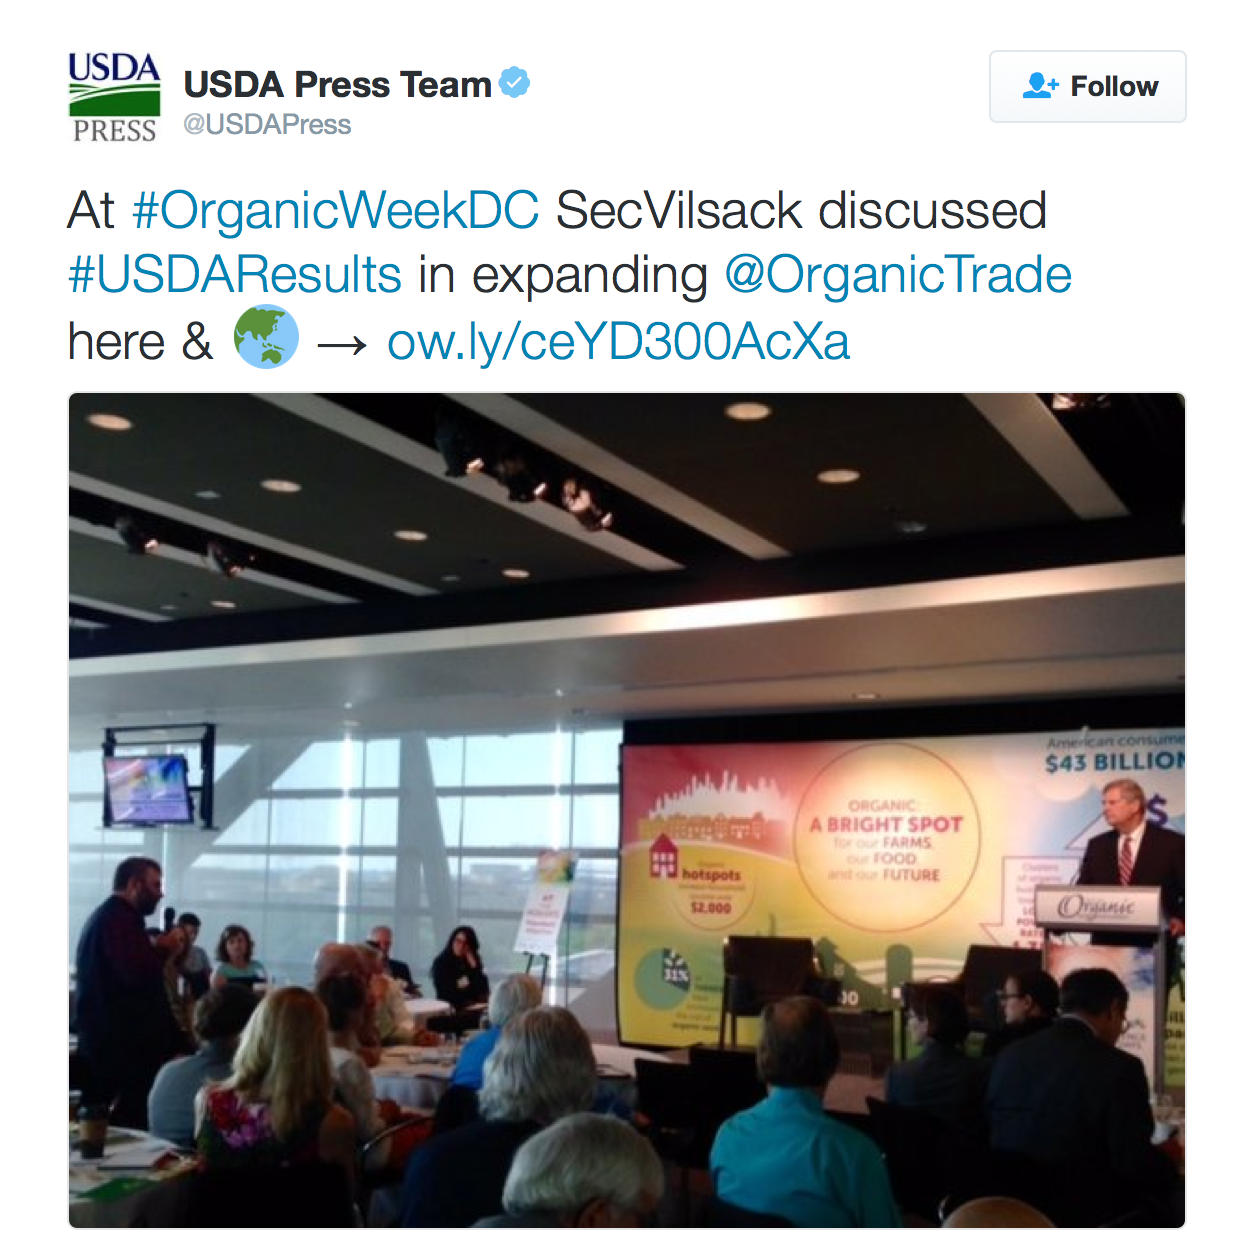 At #OrganicWeekDC SecVilsack discussed #USDAResults in expanding @OrganicTrade here & 🌏 → http://ow.ly/ceYD300AcXa 